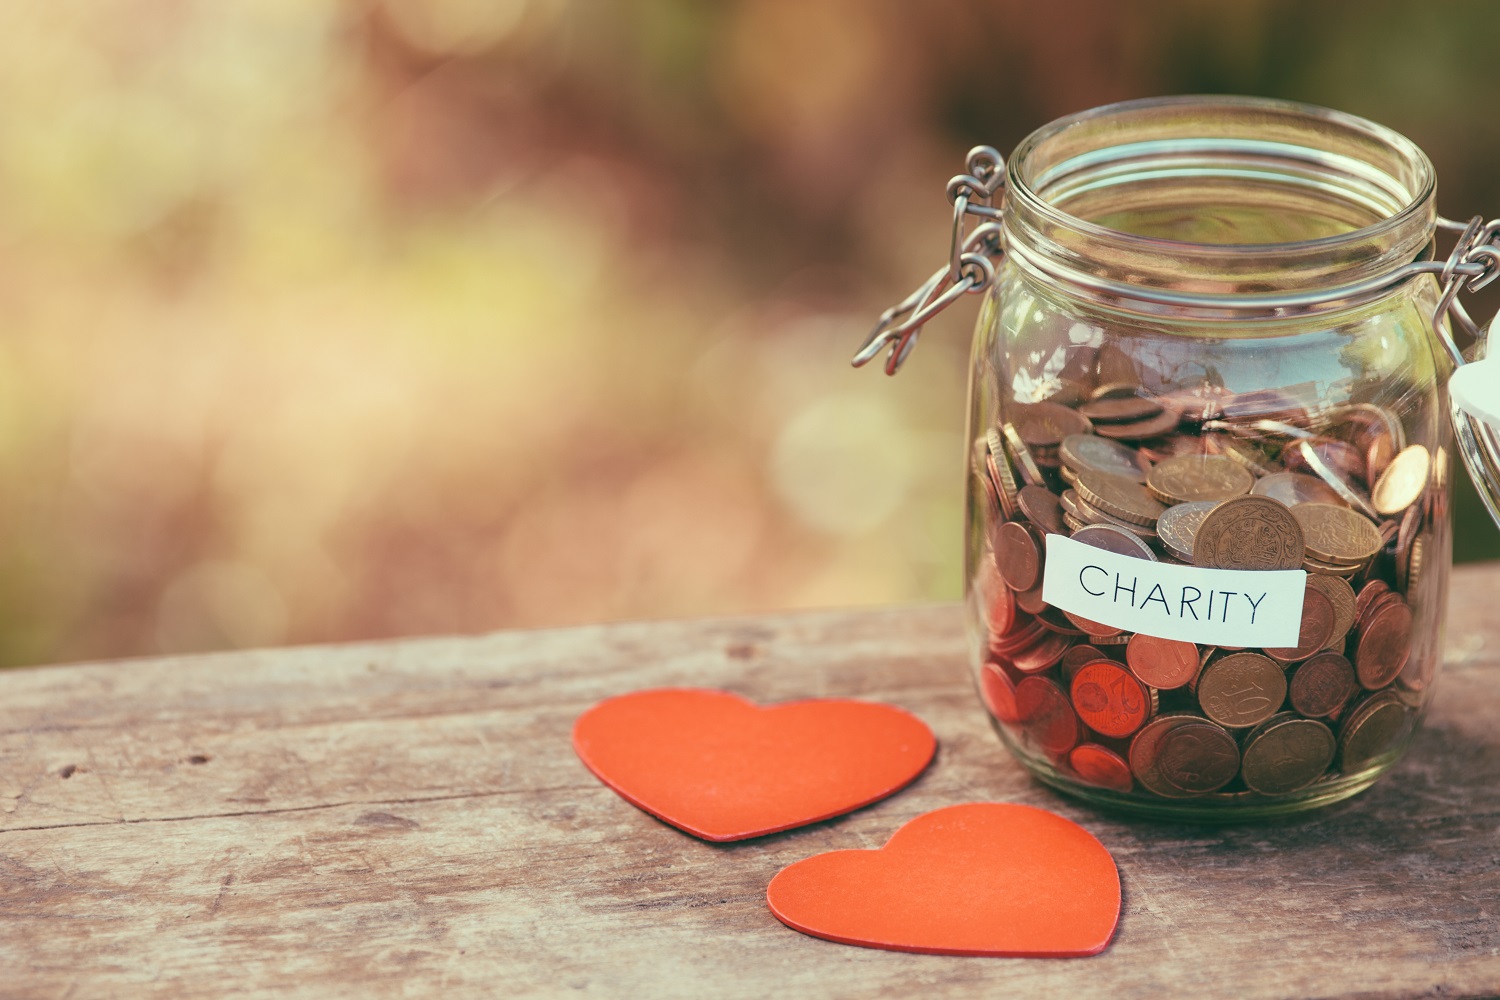 A jar of coins with the word “Charity” written on a label on the side rests on a table. Two red paper hearts are next to the jar.